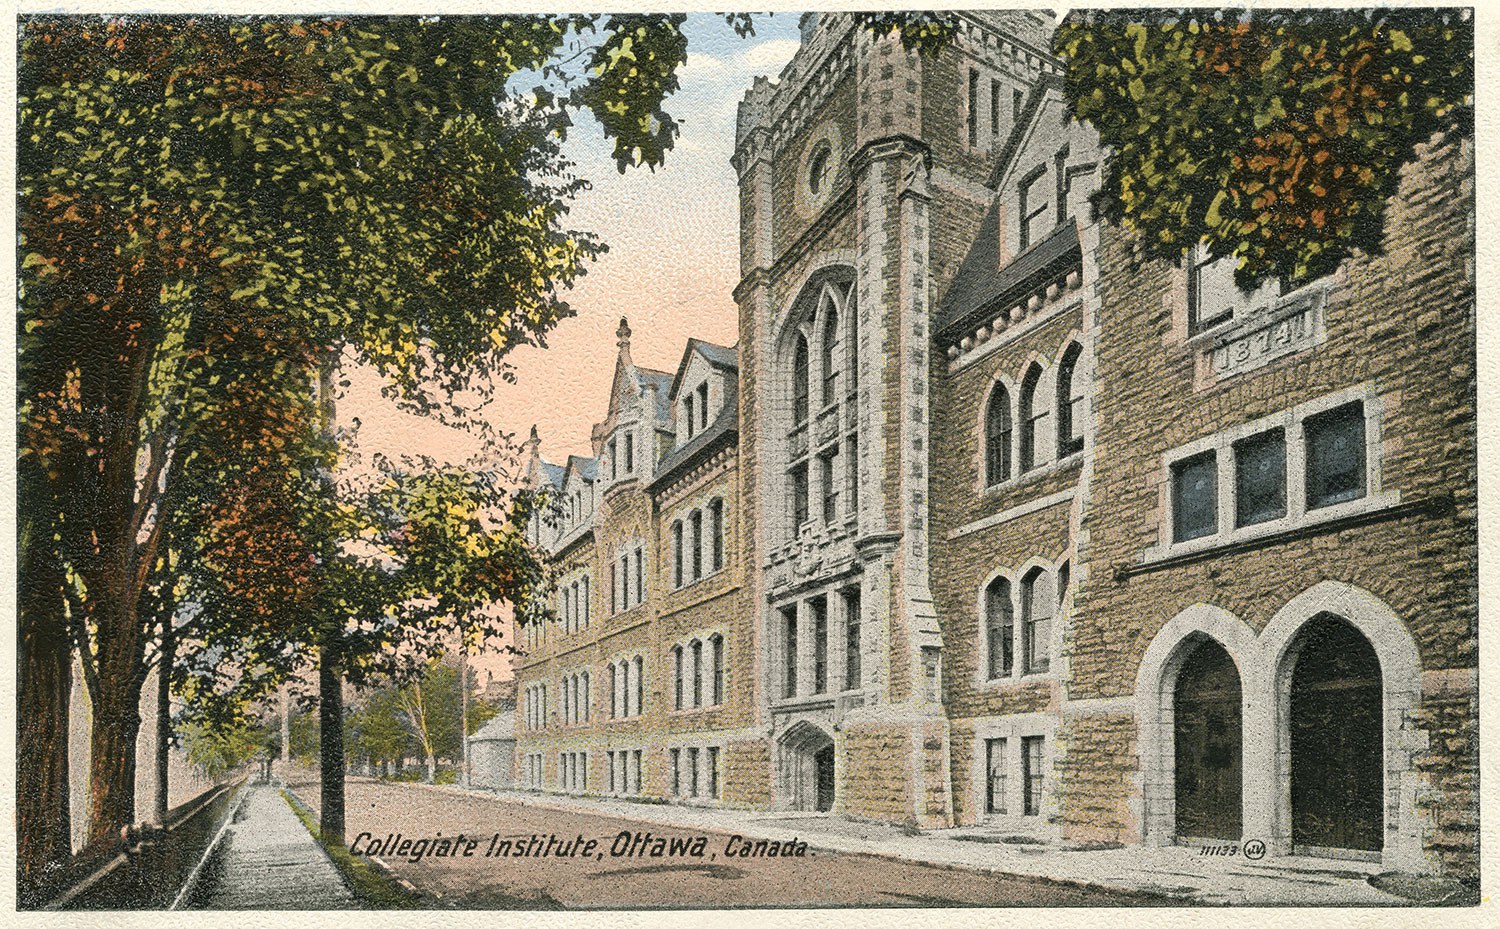 This colourized 1912 postcard shows what was then the Ottawa Collegiate Institute from Lisgar Street, now closed to traffic (Photo: International Stationery Company)